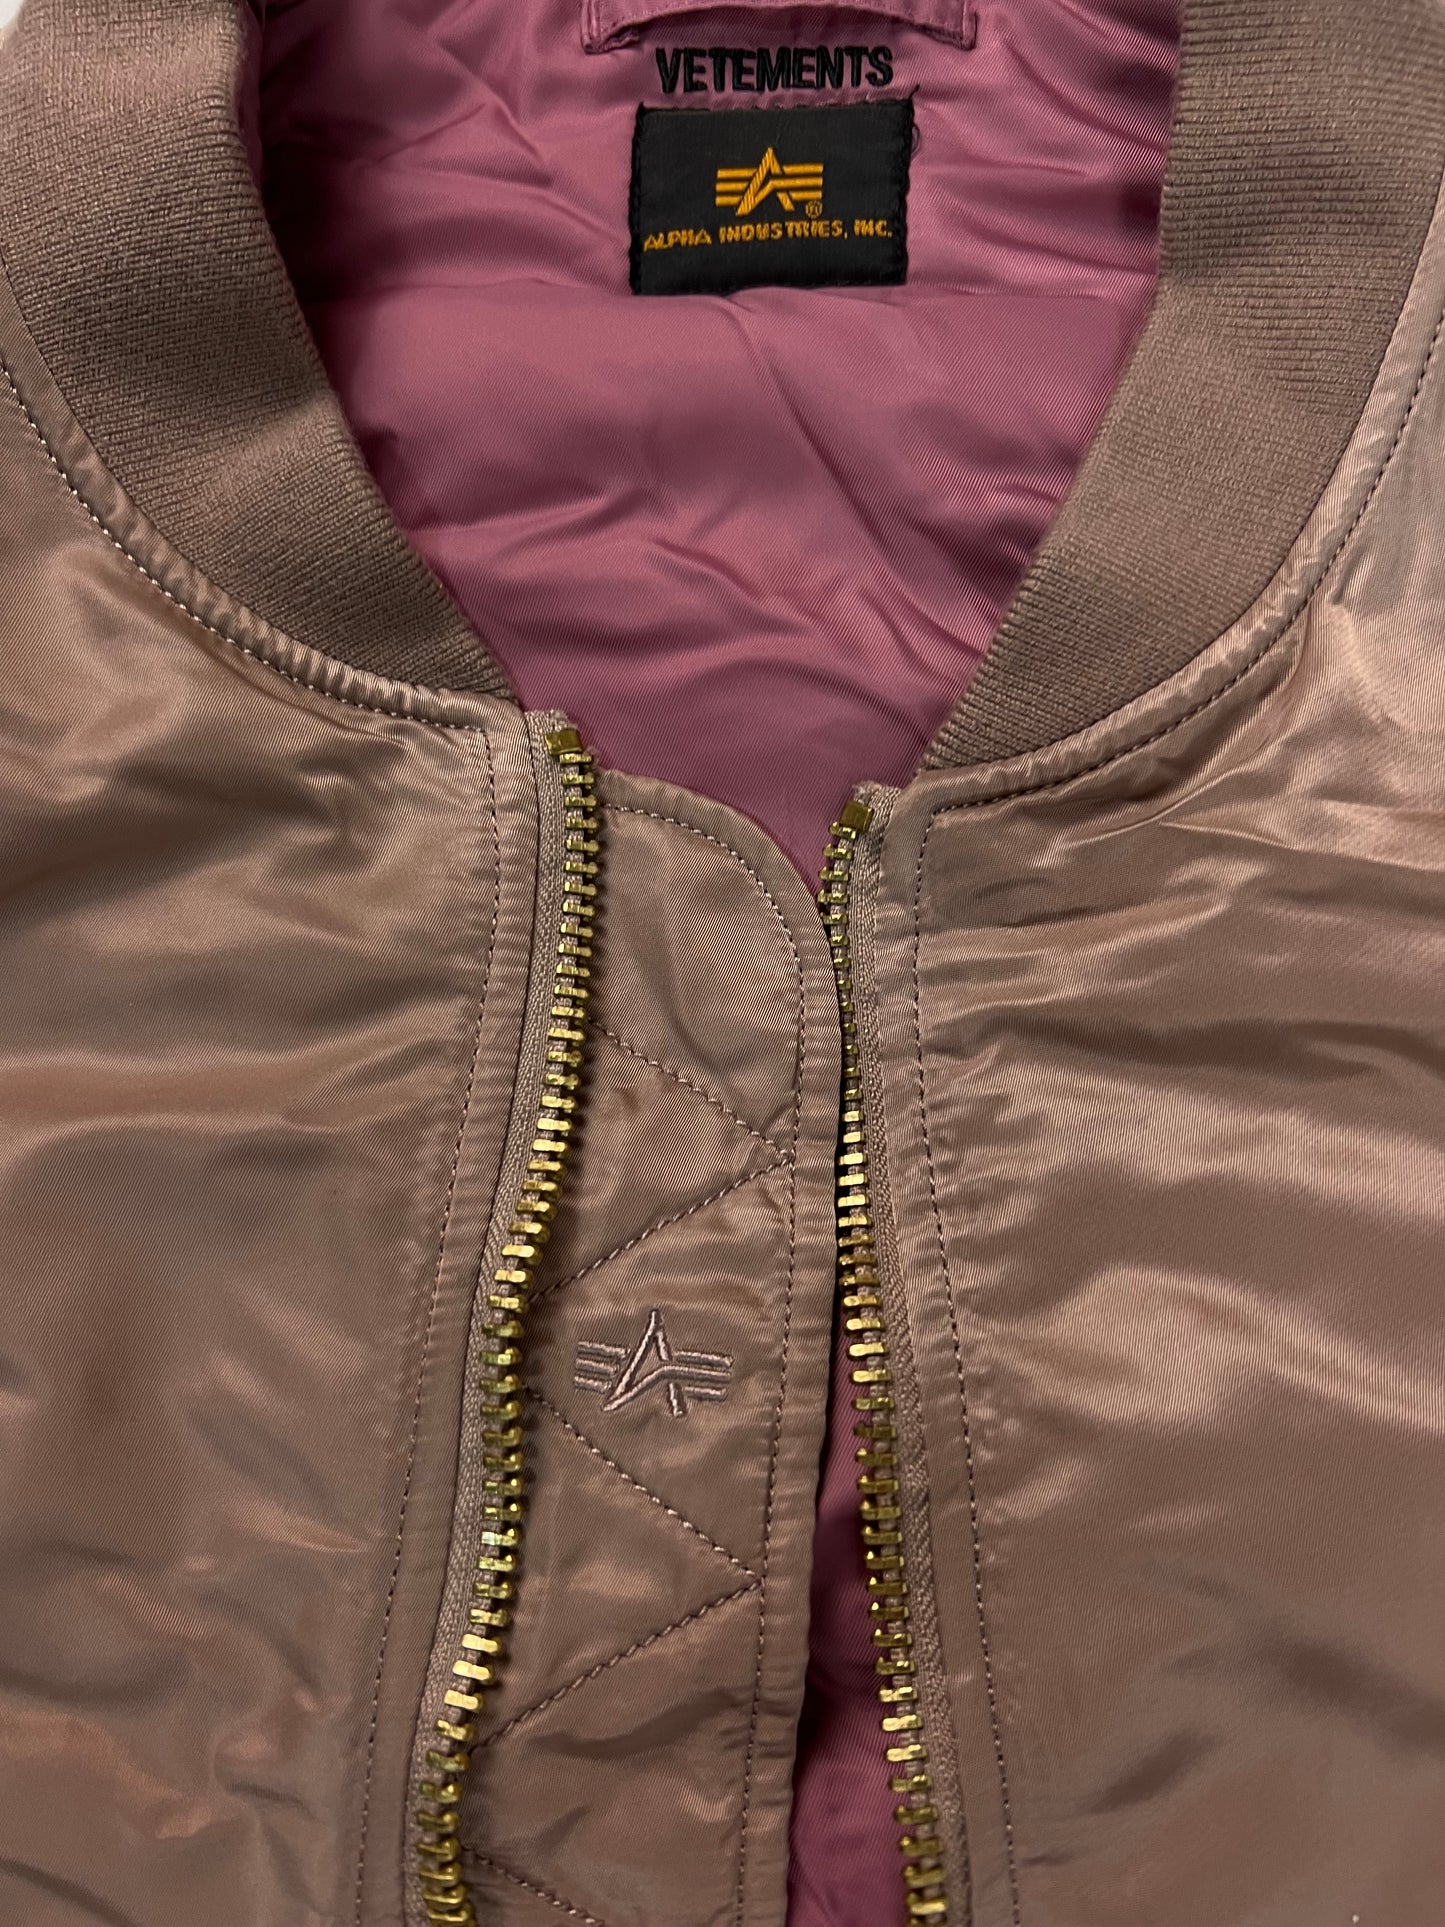 Vetements AW17 oversized reversible MA1 Bomber jacket in pink SZ:XS